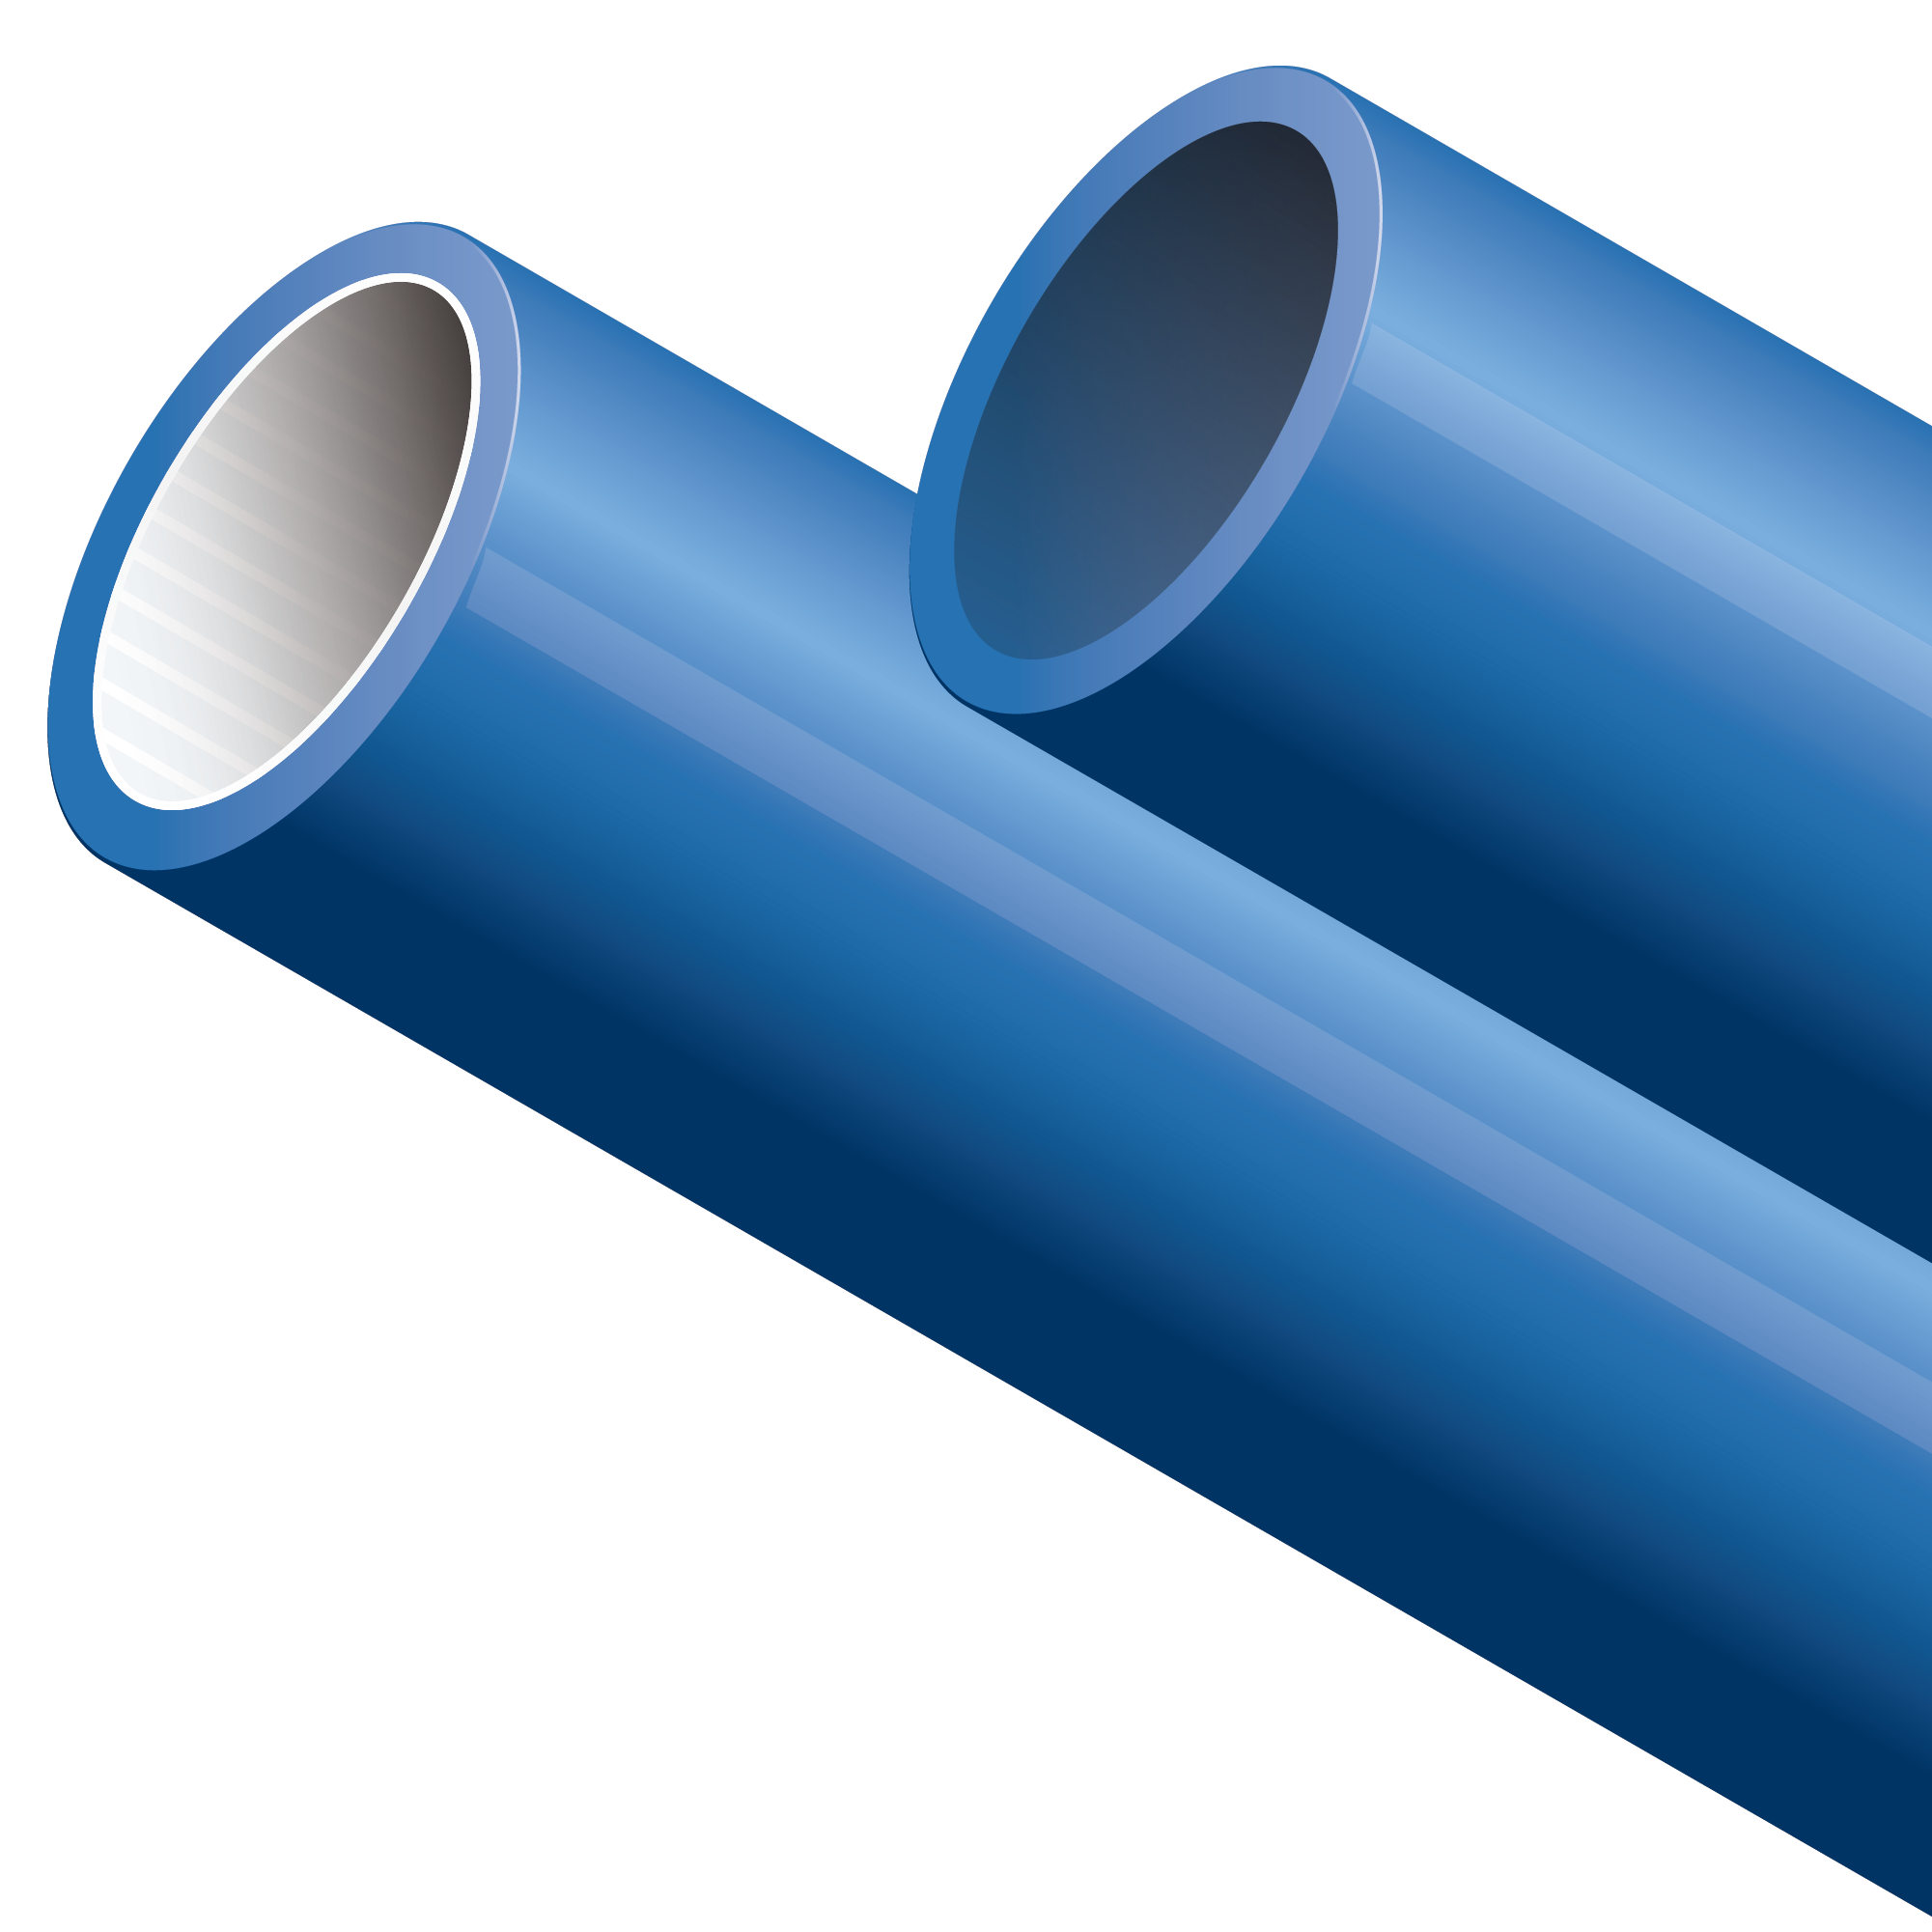 Our most popular HDPE duct, Smoothwall is available with an optional SILICORE® ULF permanently lubricated lining. These ducts perform well in all environments, aerial, direct buried, and underground. Multiple wall thickness are available based on the application.